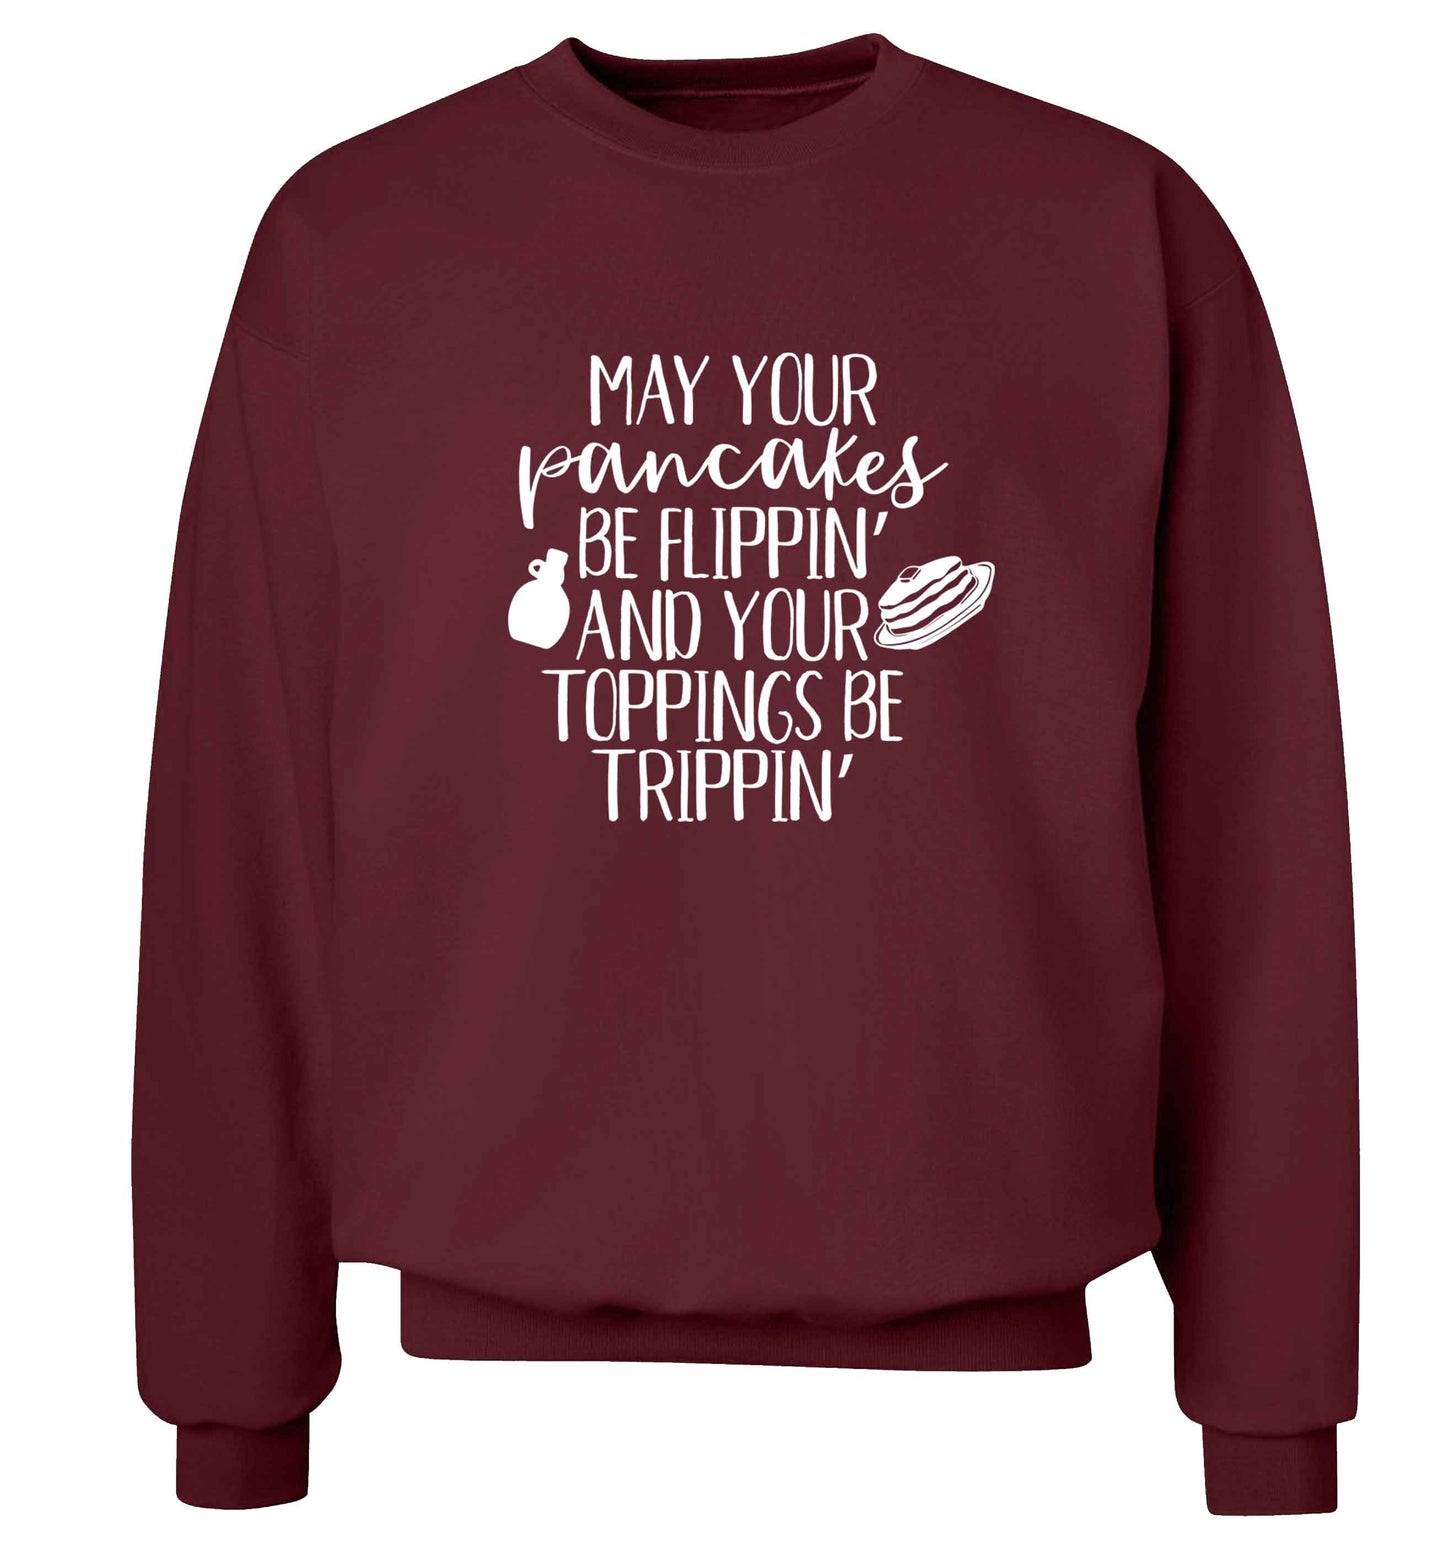 May your pancakes be flippin' and your toppings be trippin' adult's unisex maroon sweater 2XL